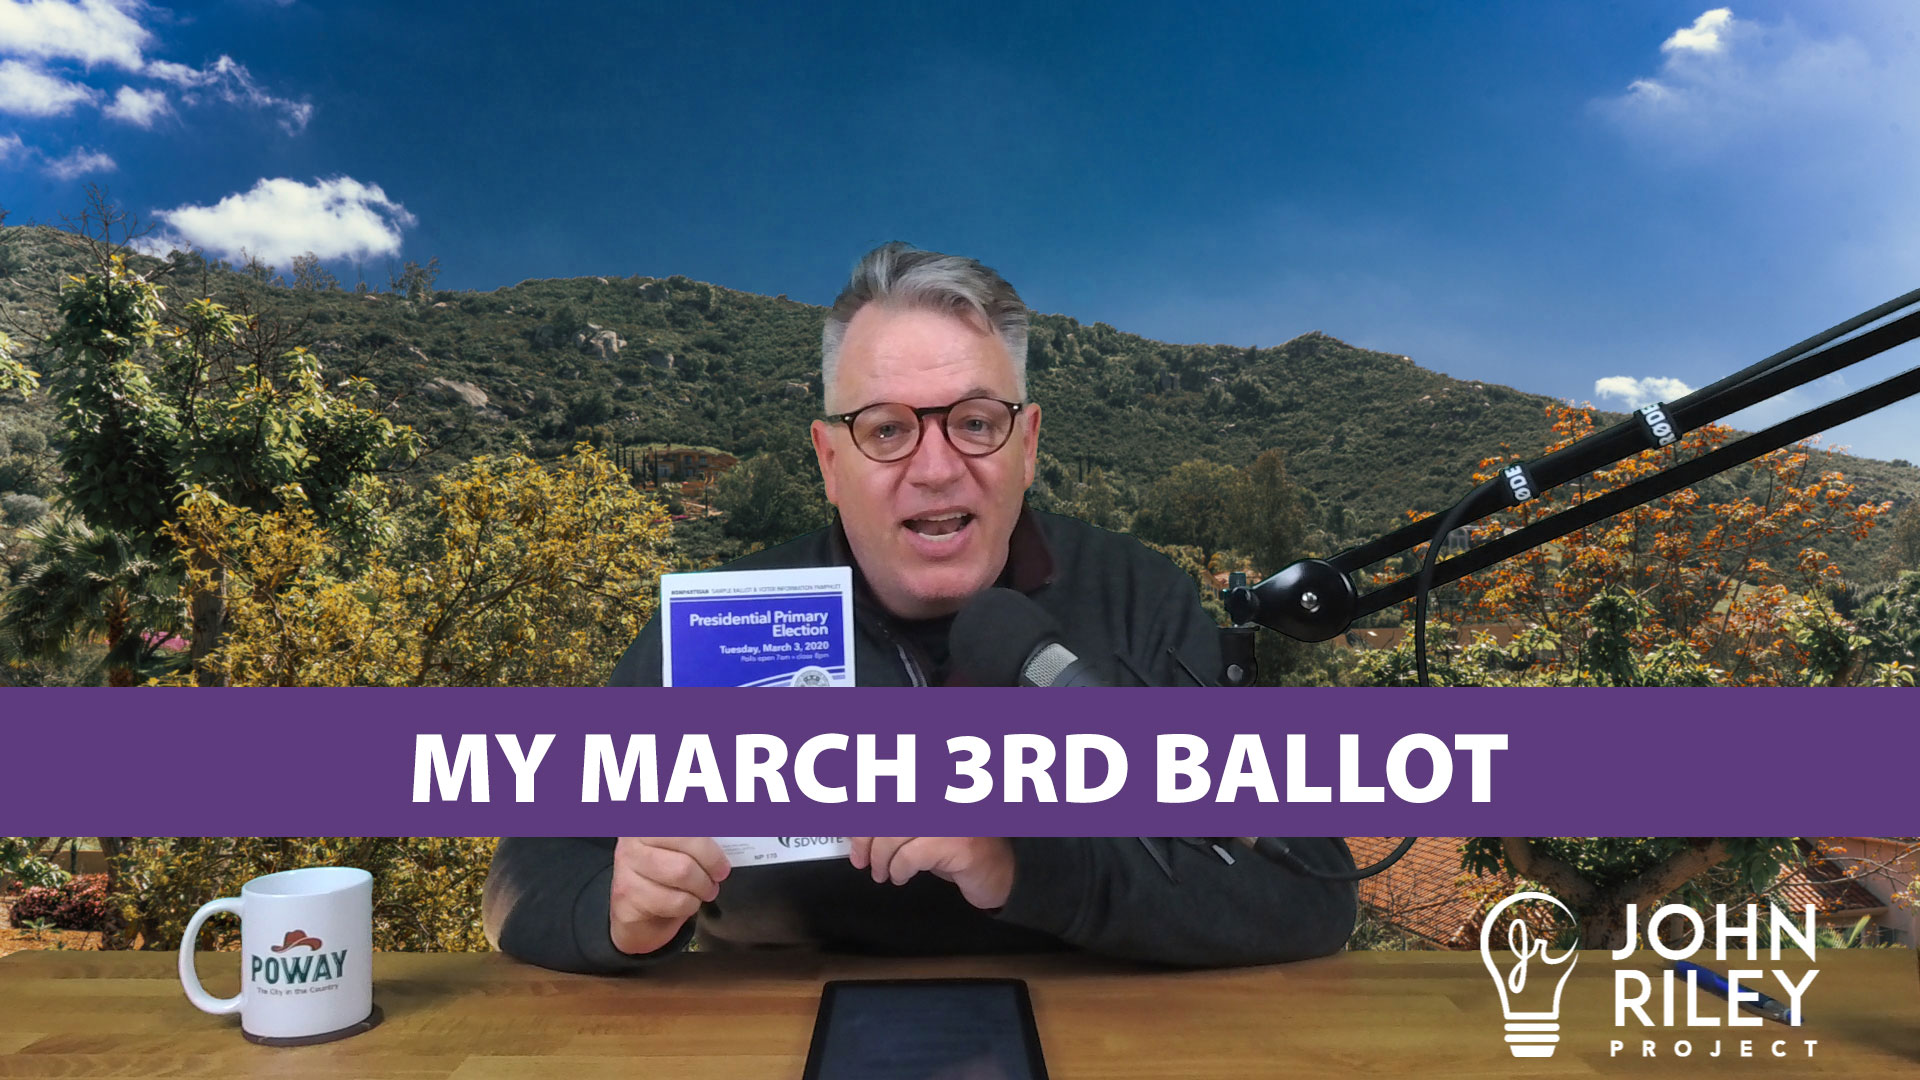 My March 3rd Ballot, Super Tuesday, John Riley Project, JRP0114